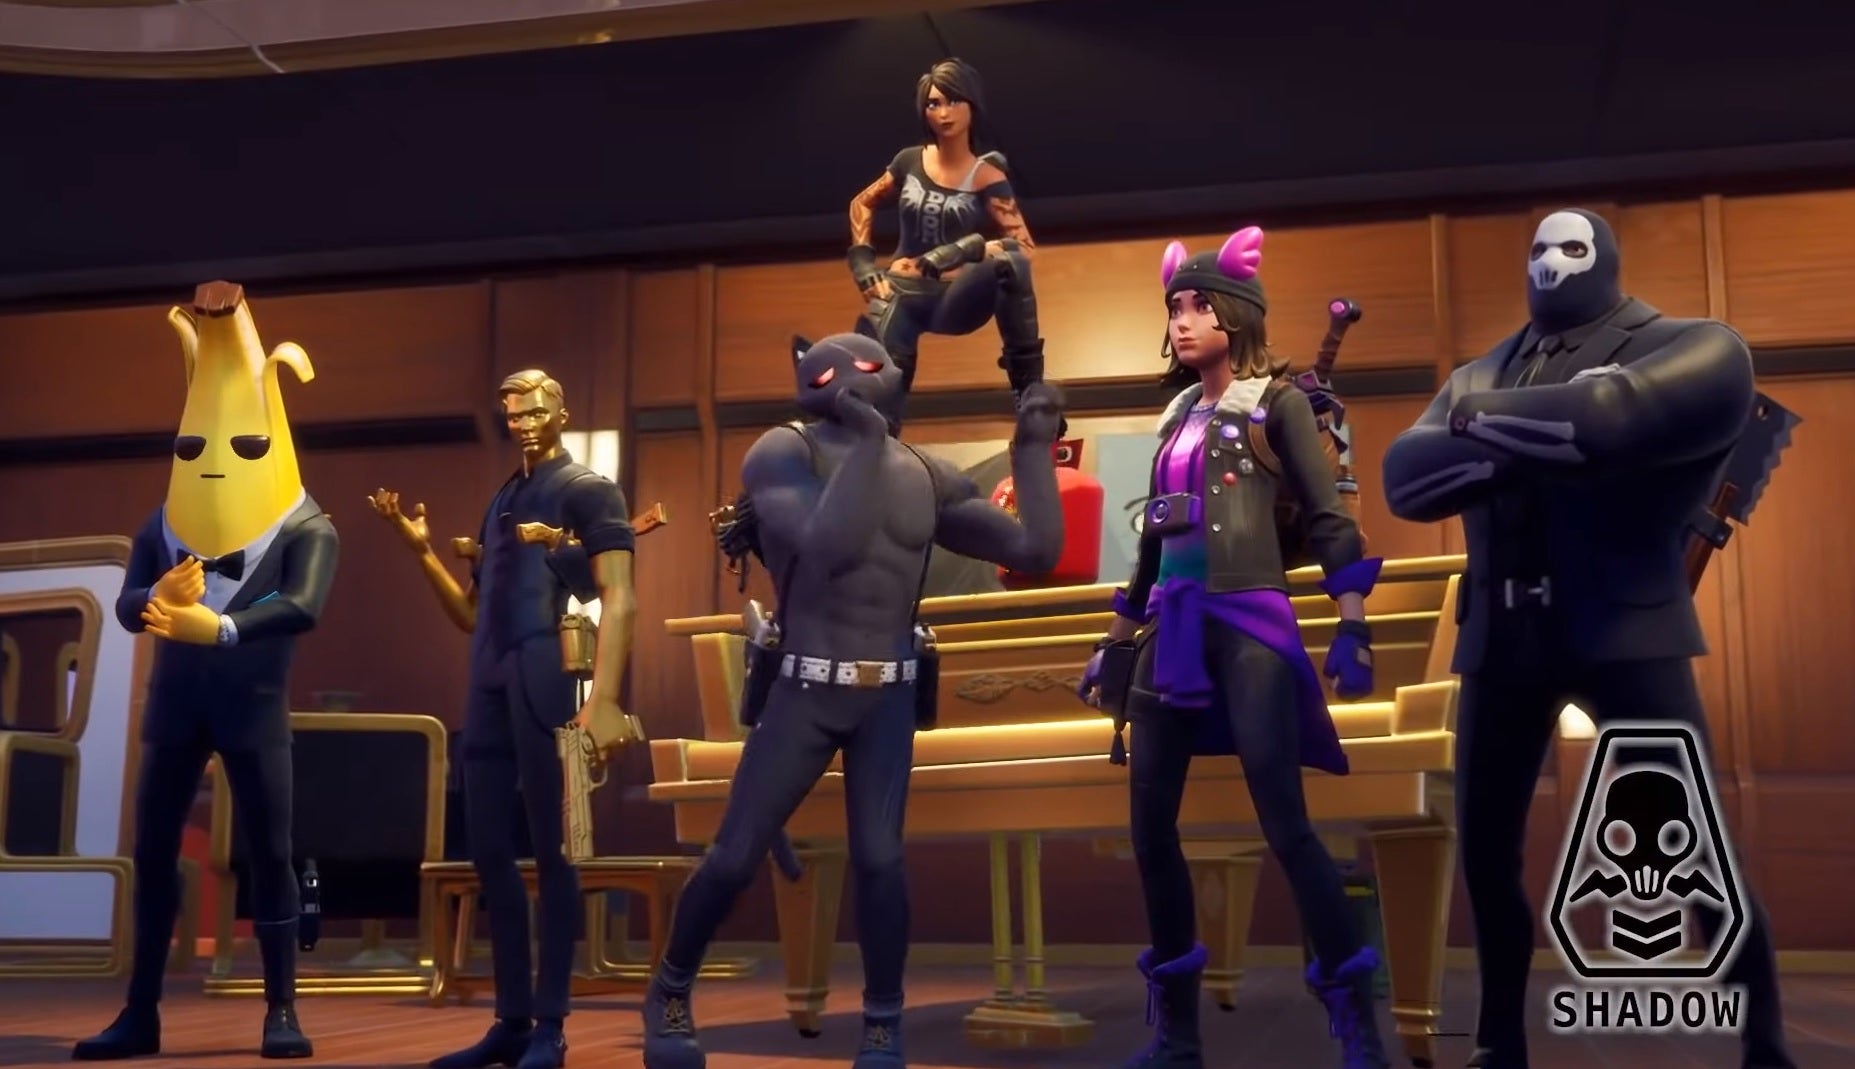 Image for New Fortnite Season 2 Skins: Meowscles, Midas, Maya and more revealed in Battle Pass trailer